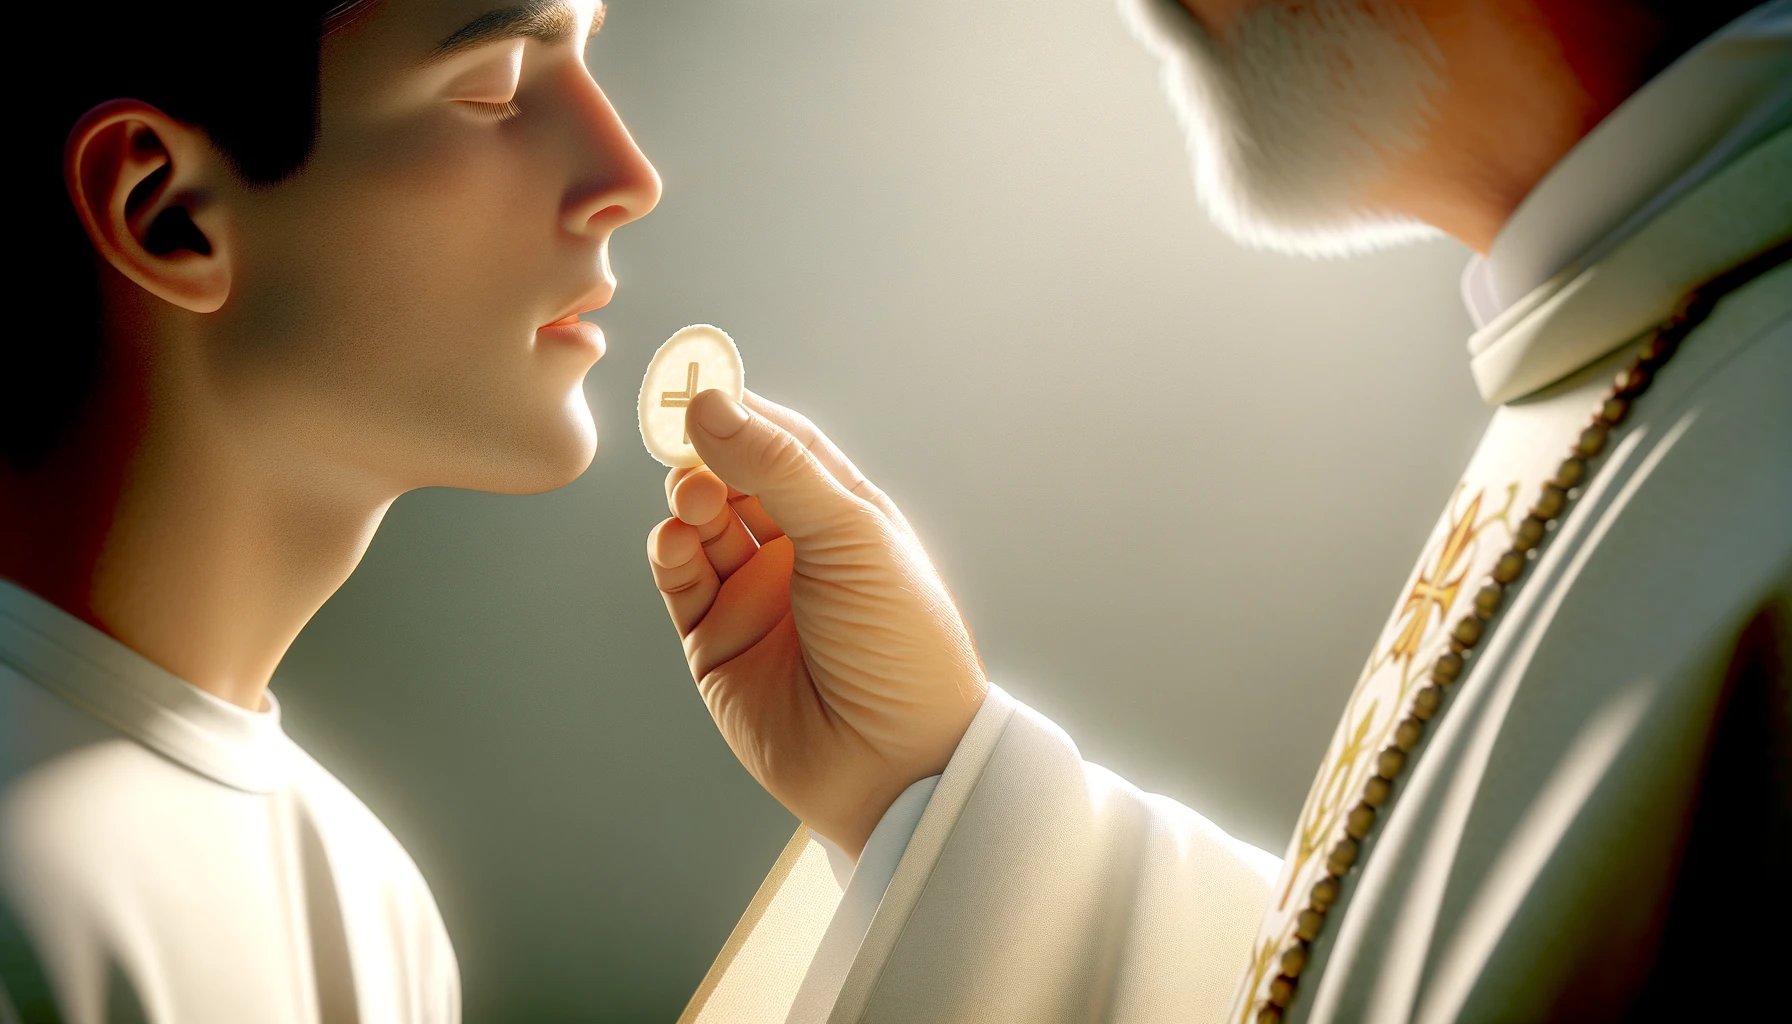 How Many Times Can A Catholic Receive Holy Communion In One Day